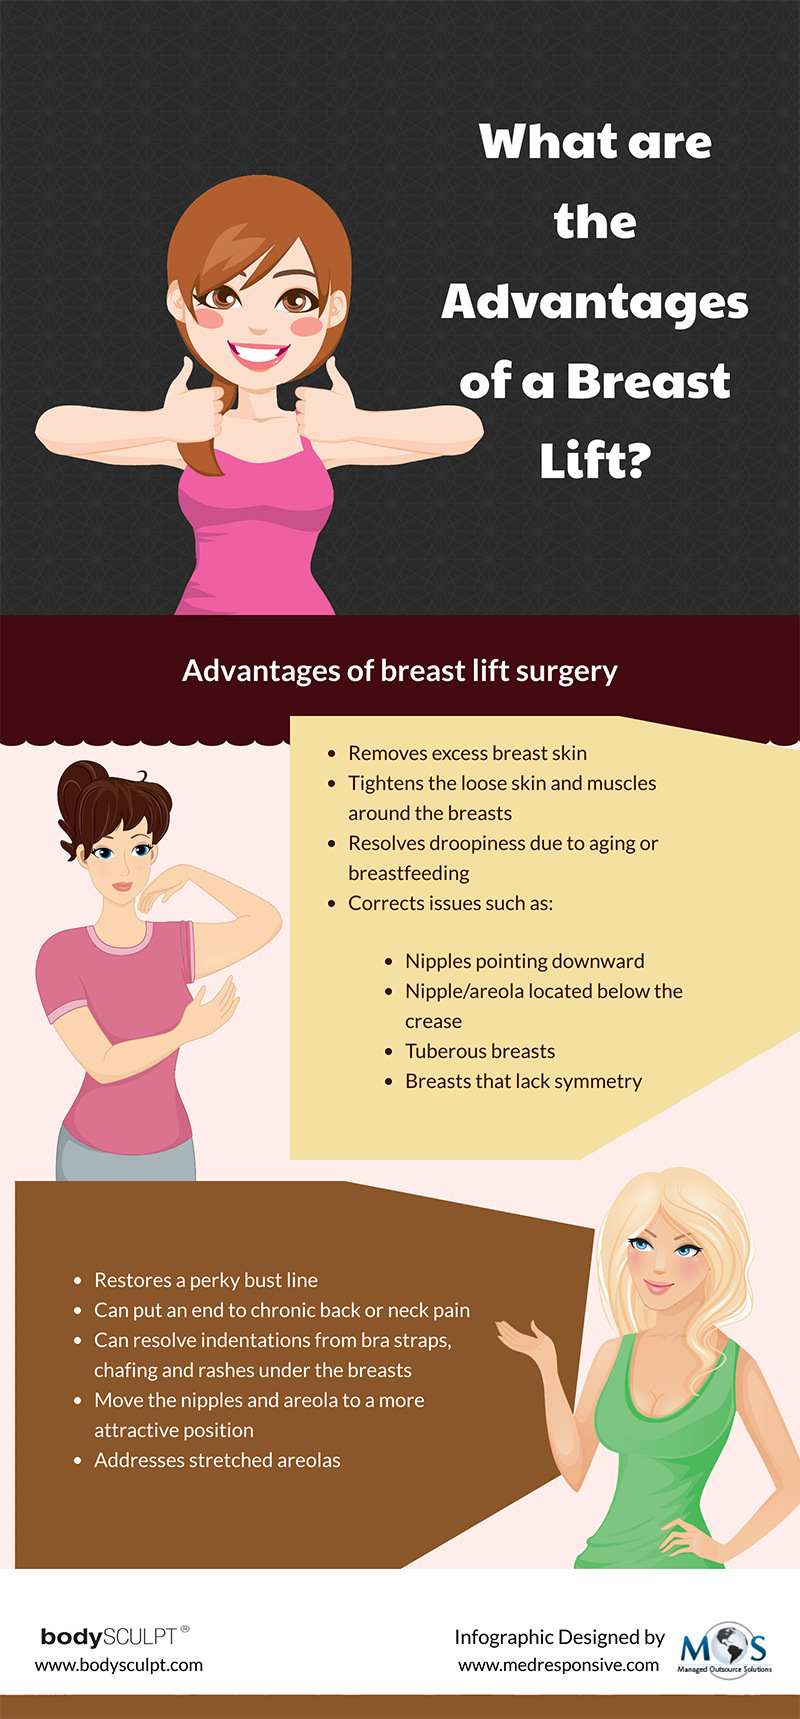 Exercising After a Breast Lift